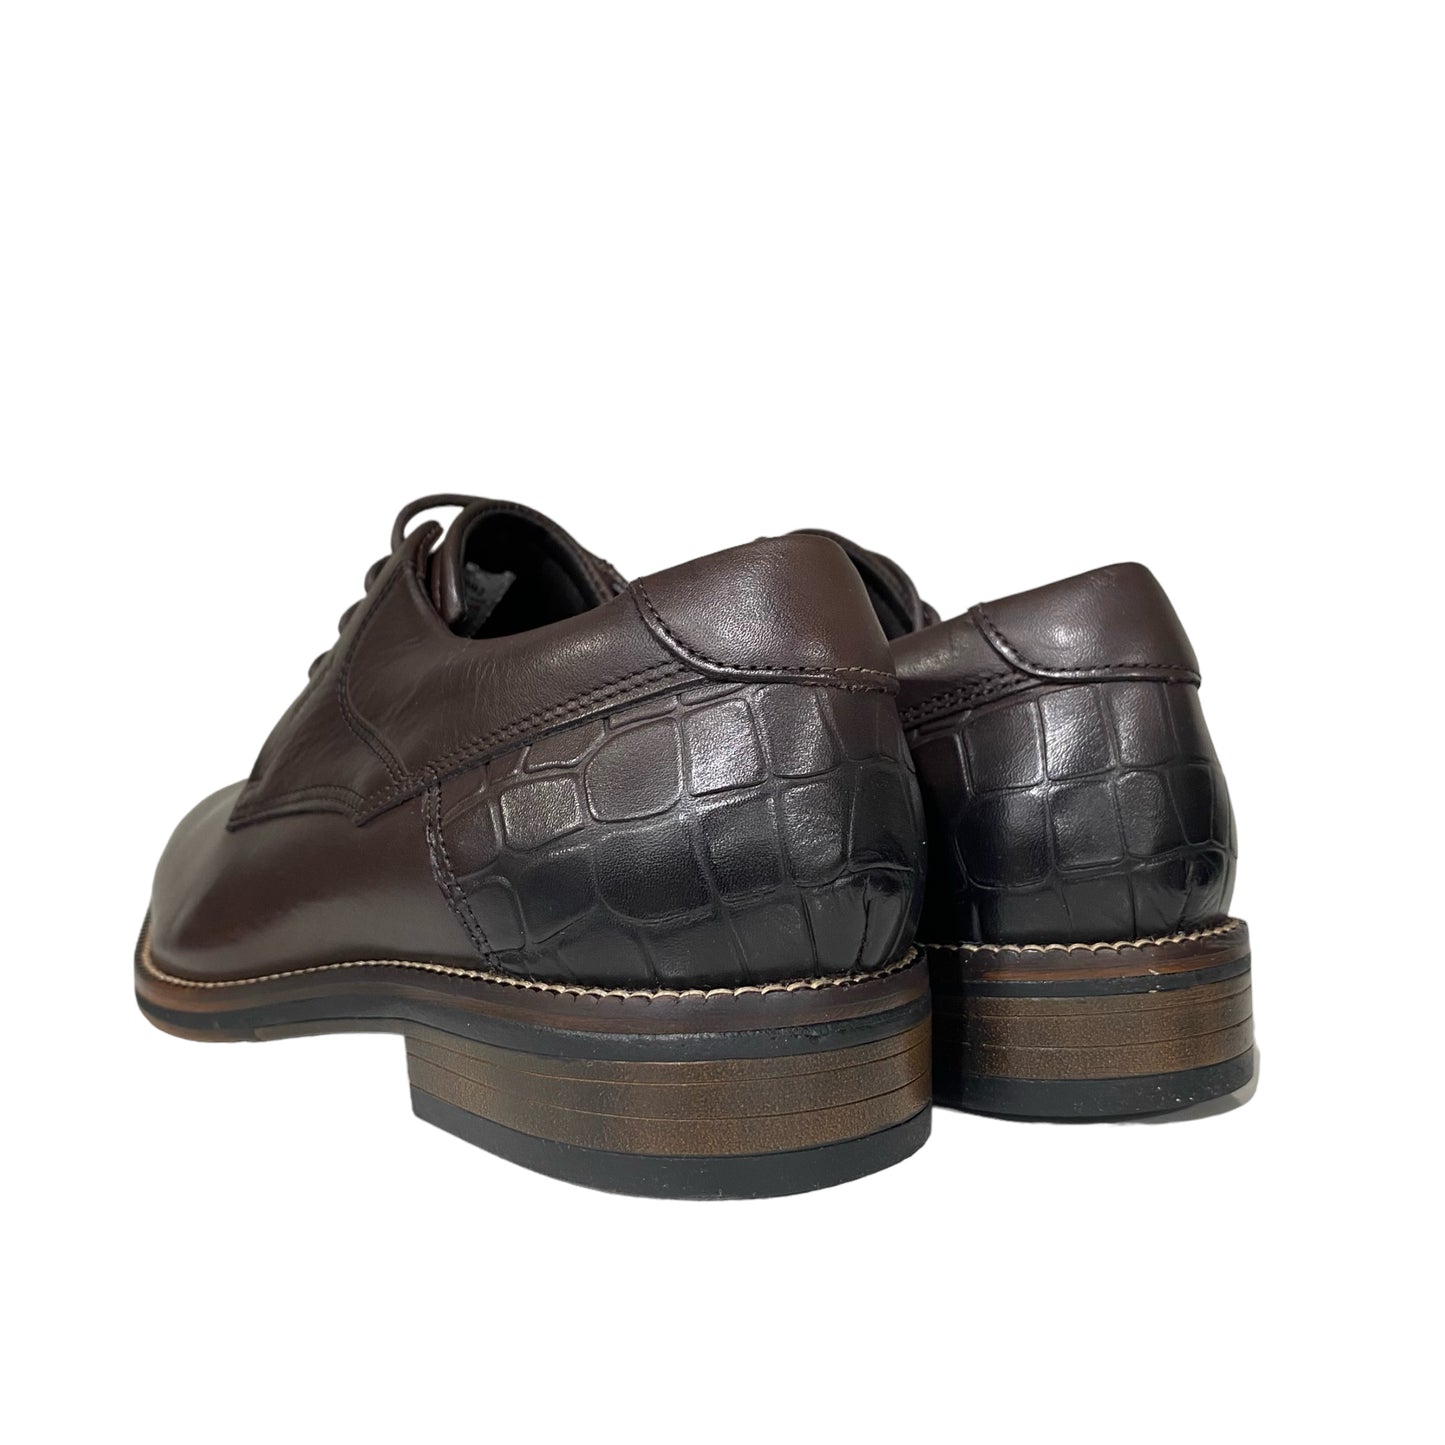 Ferracini - Fergus Shoes - Brown or Black Leather